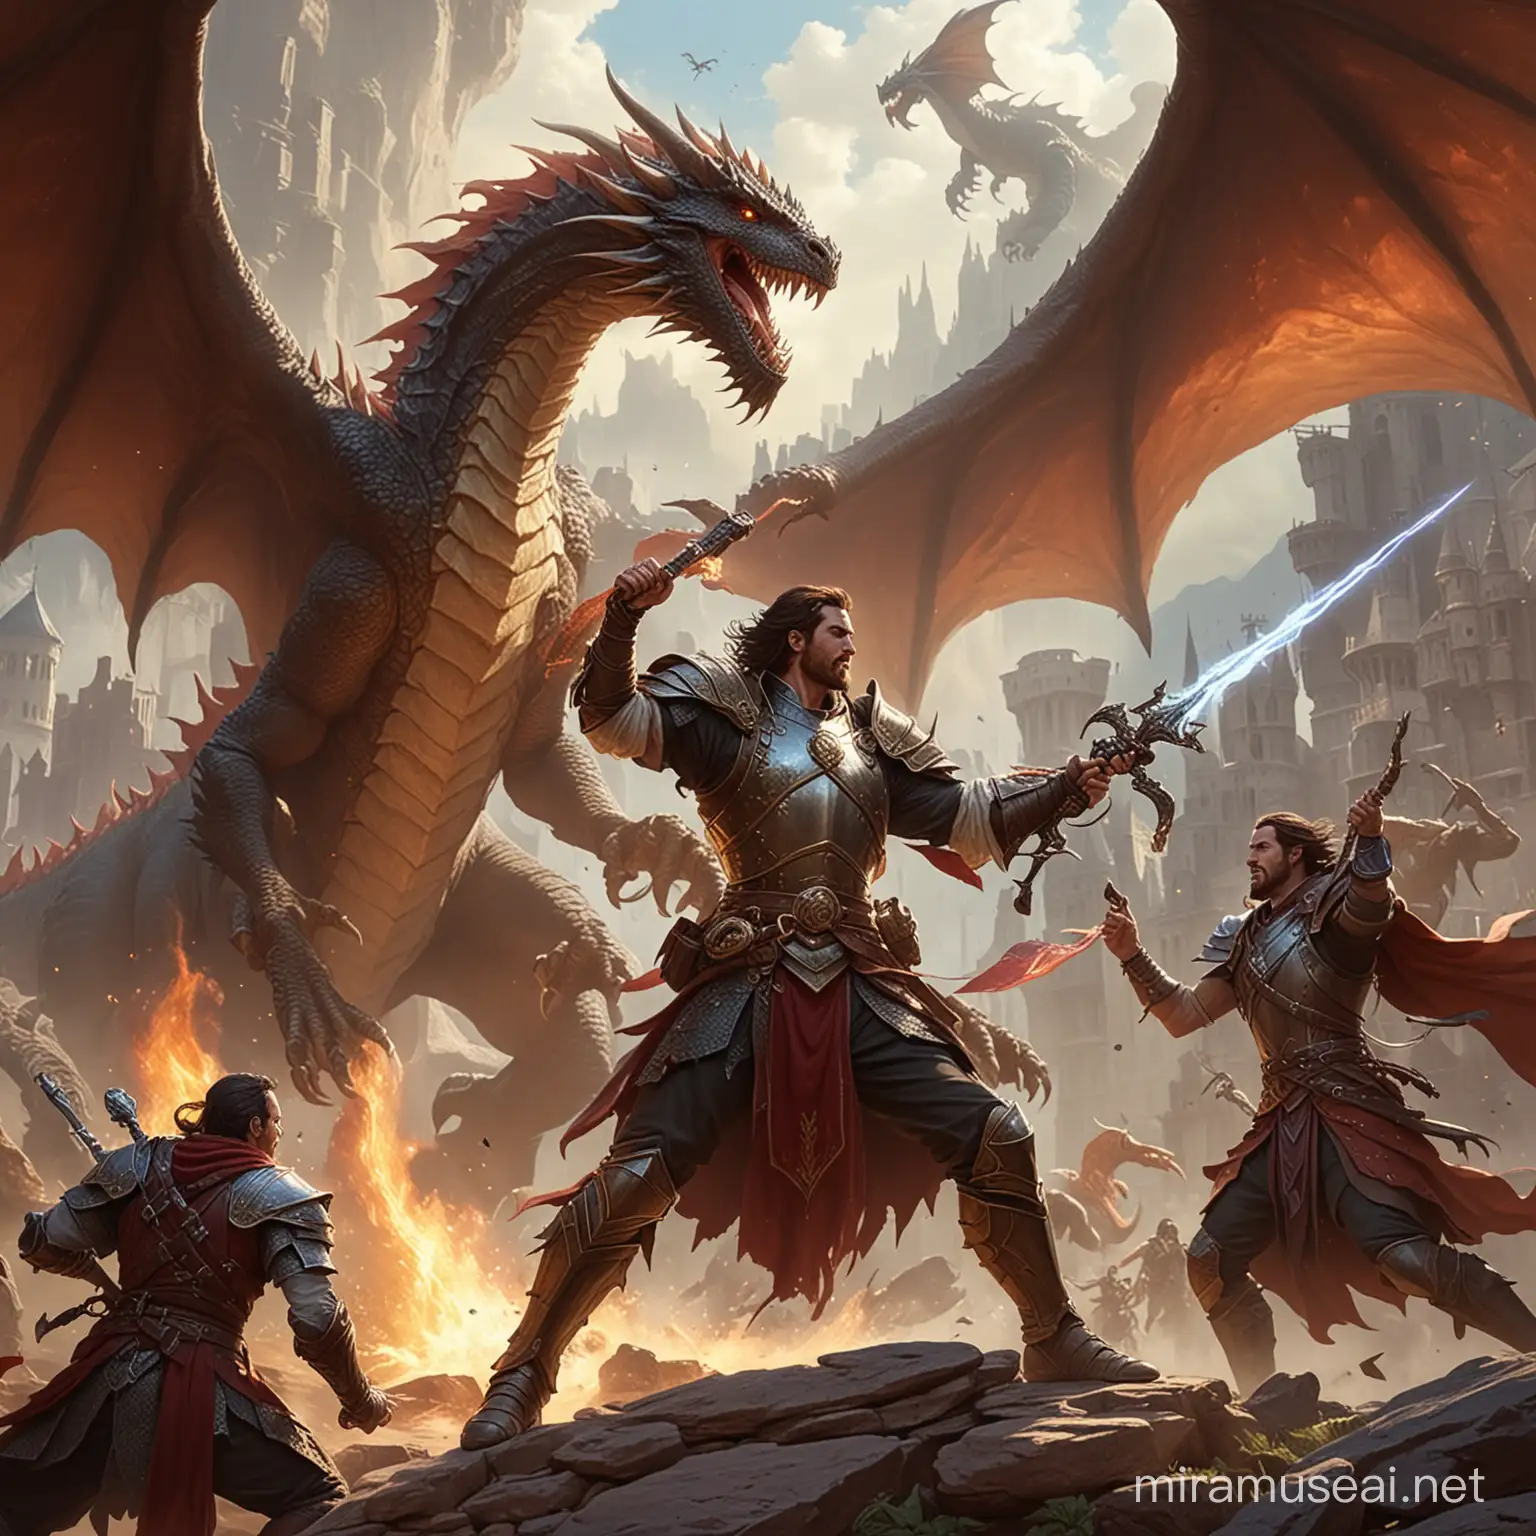 Epic Battle Sorcerer Paladin and Bard Confronting a Fierce Dragon